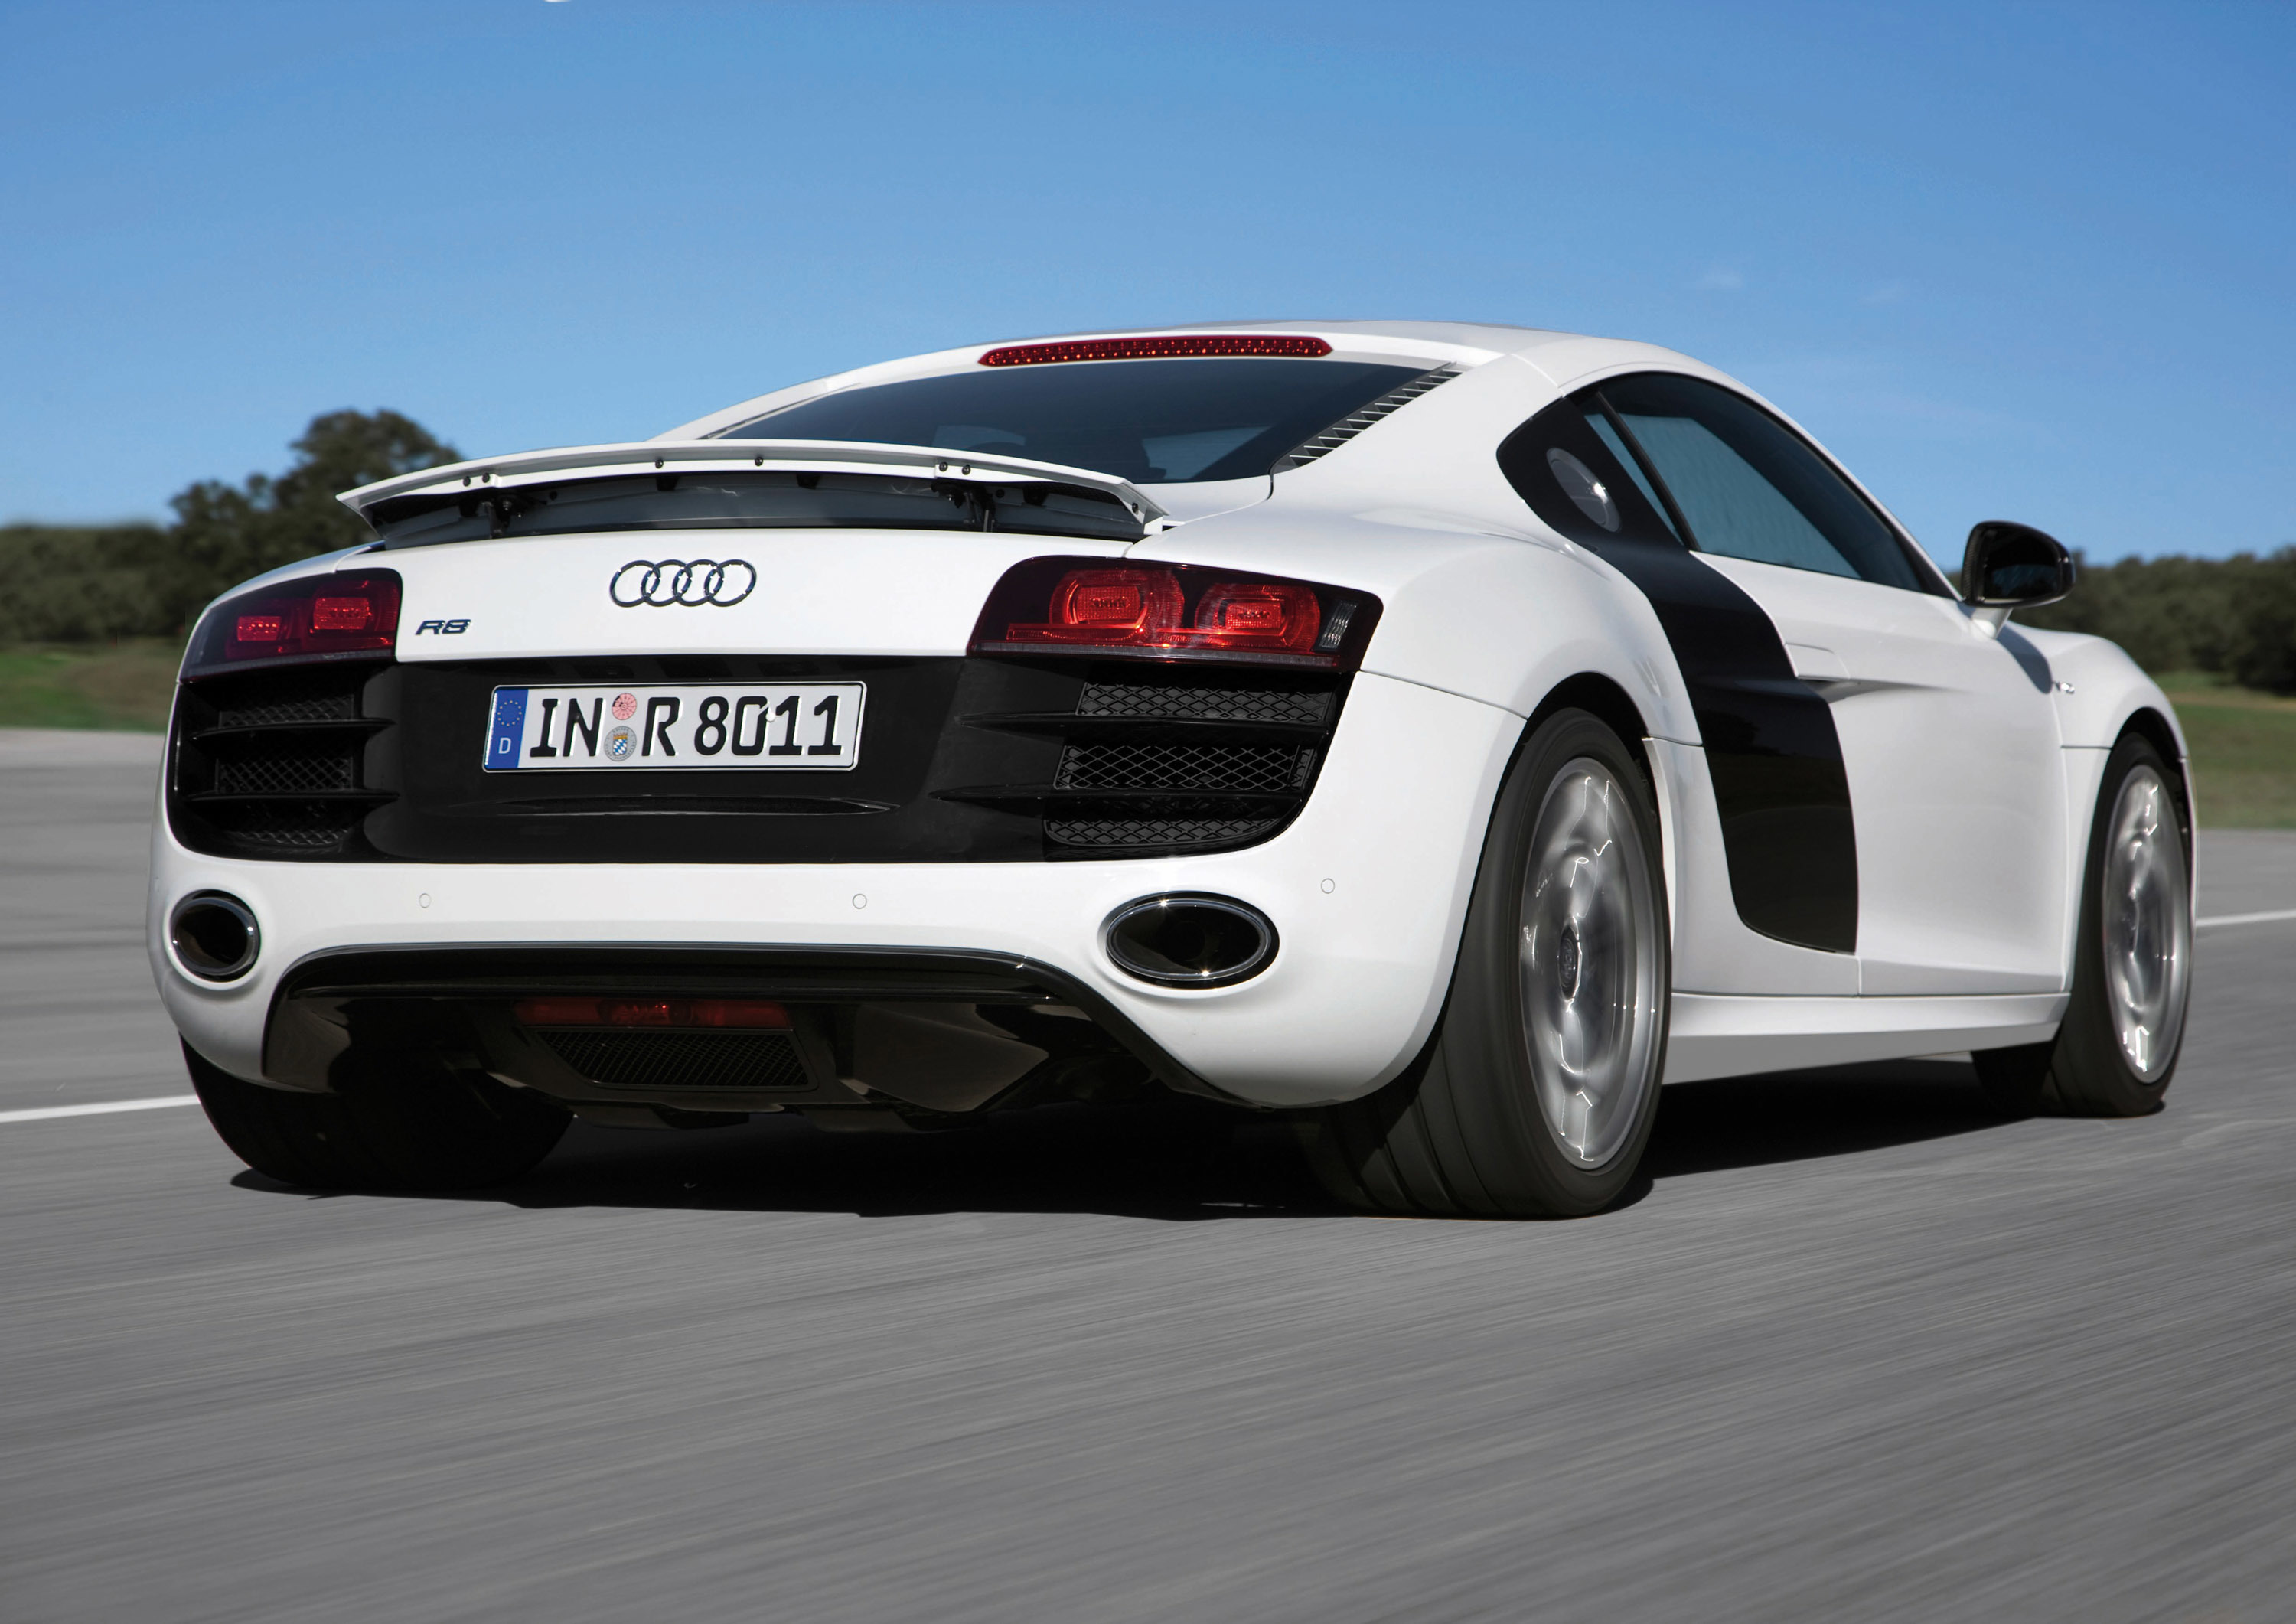  Wallpapers on White Cars Audi Backview R8 Side View Hd Wallpaper   Cars   Trucks